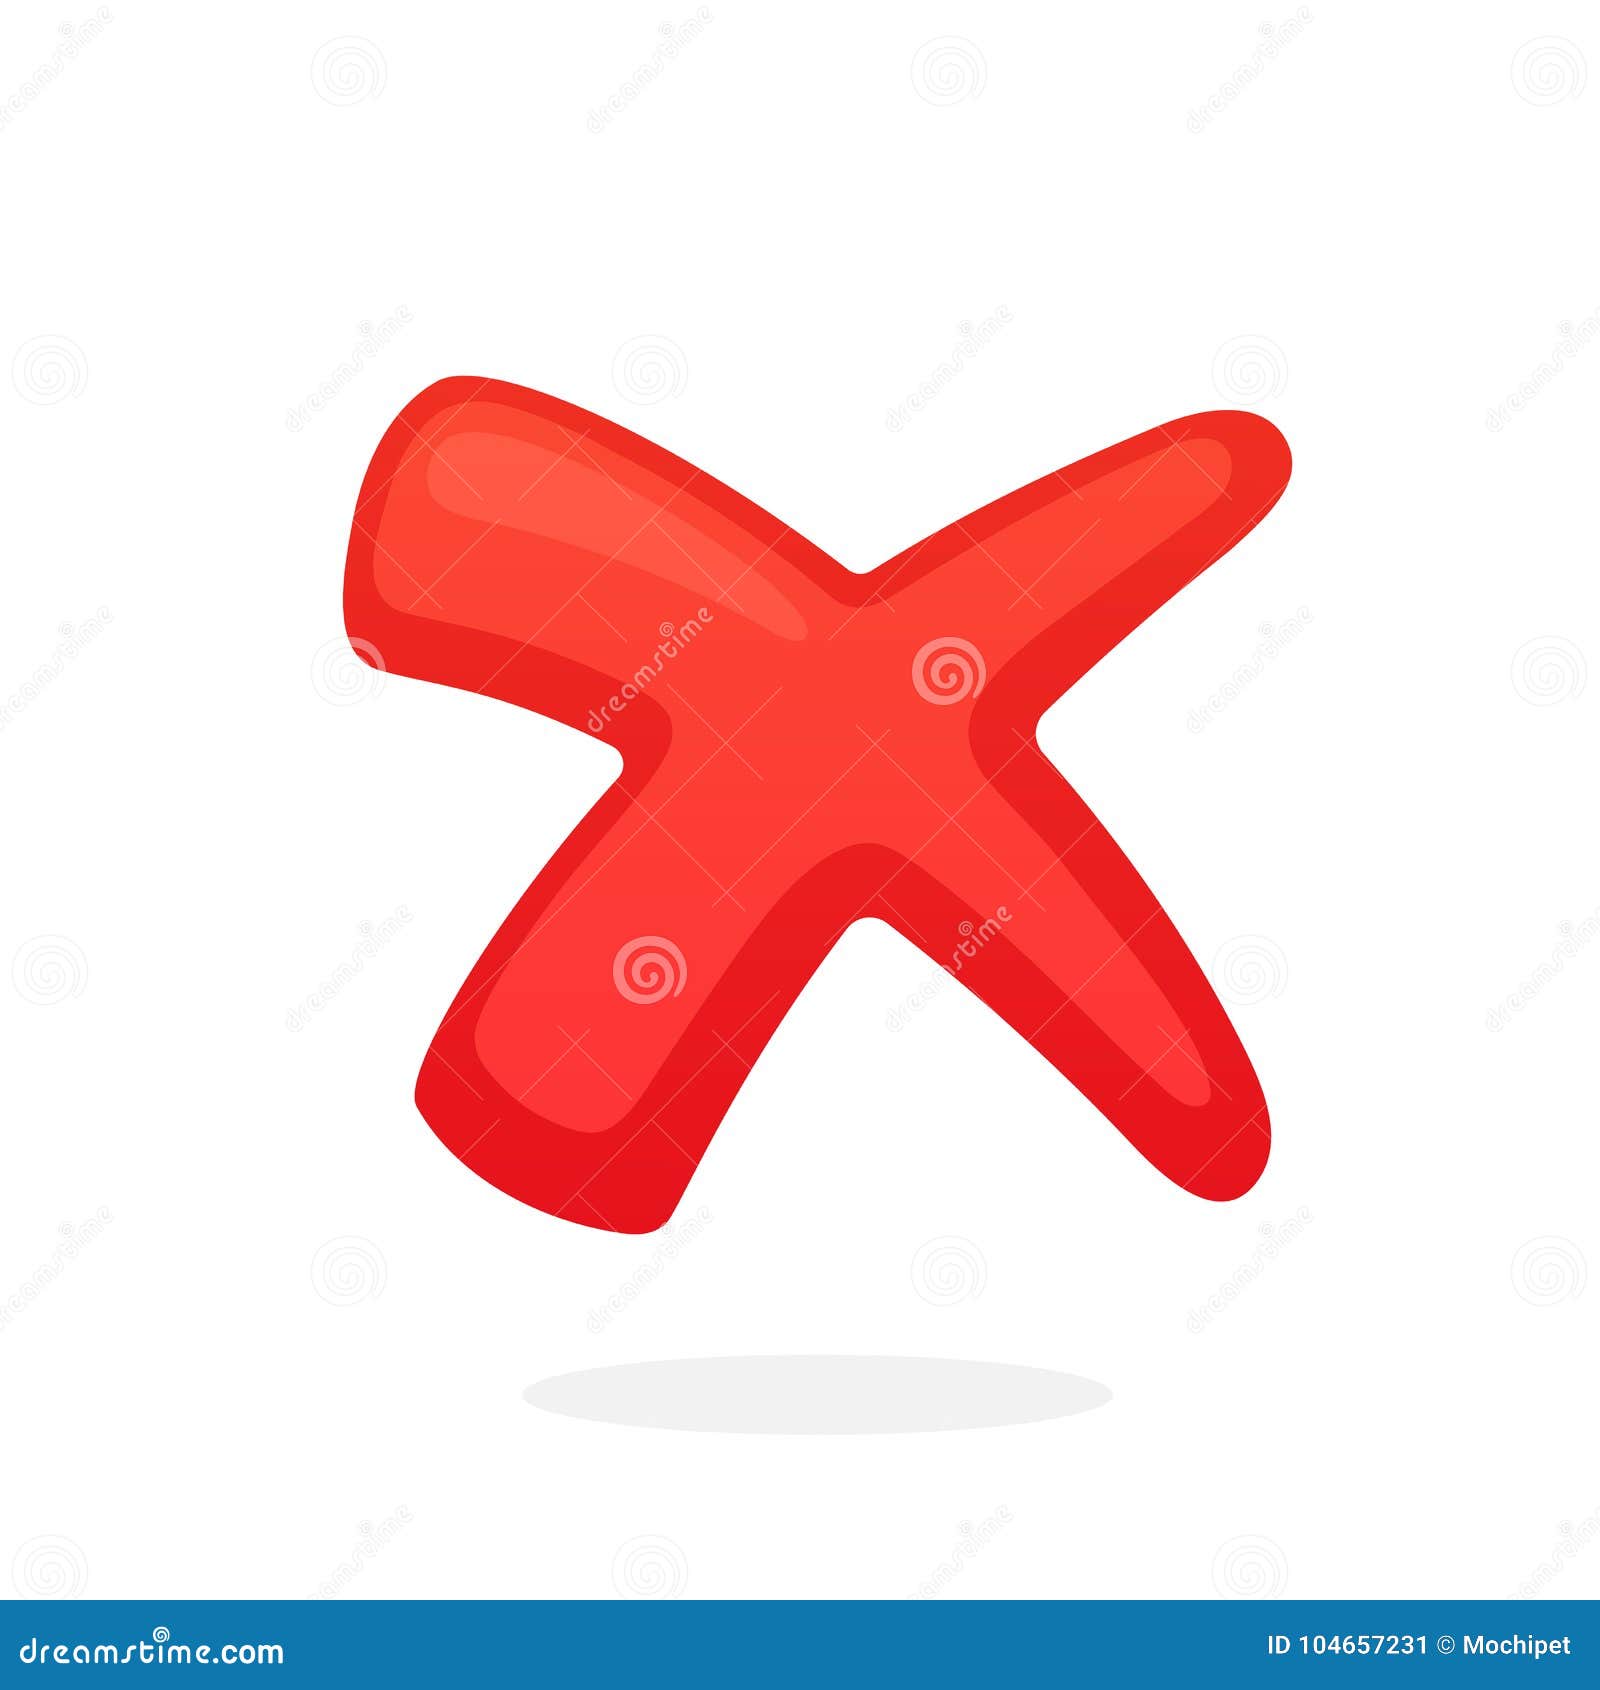 flat red cross check mark for indicate wrong choice